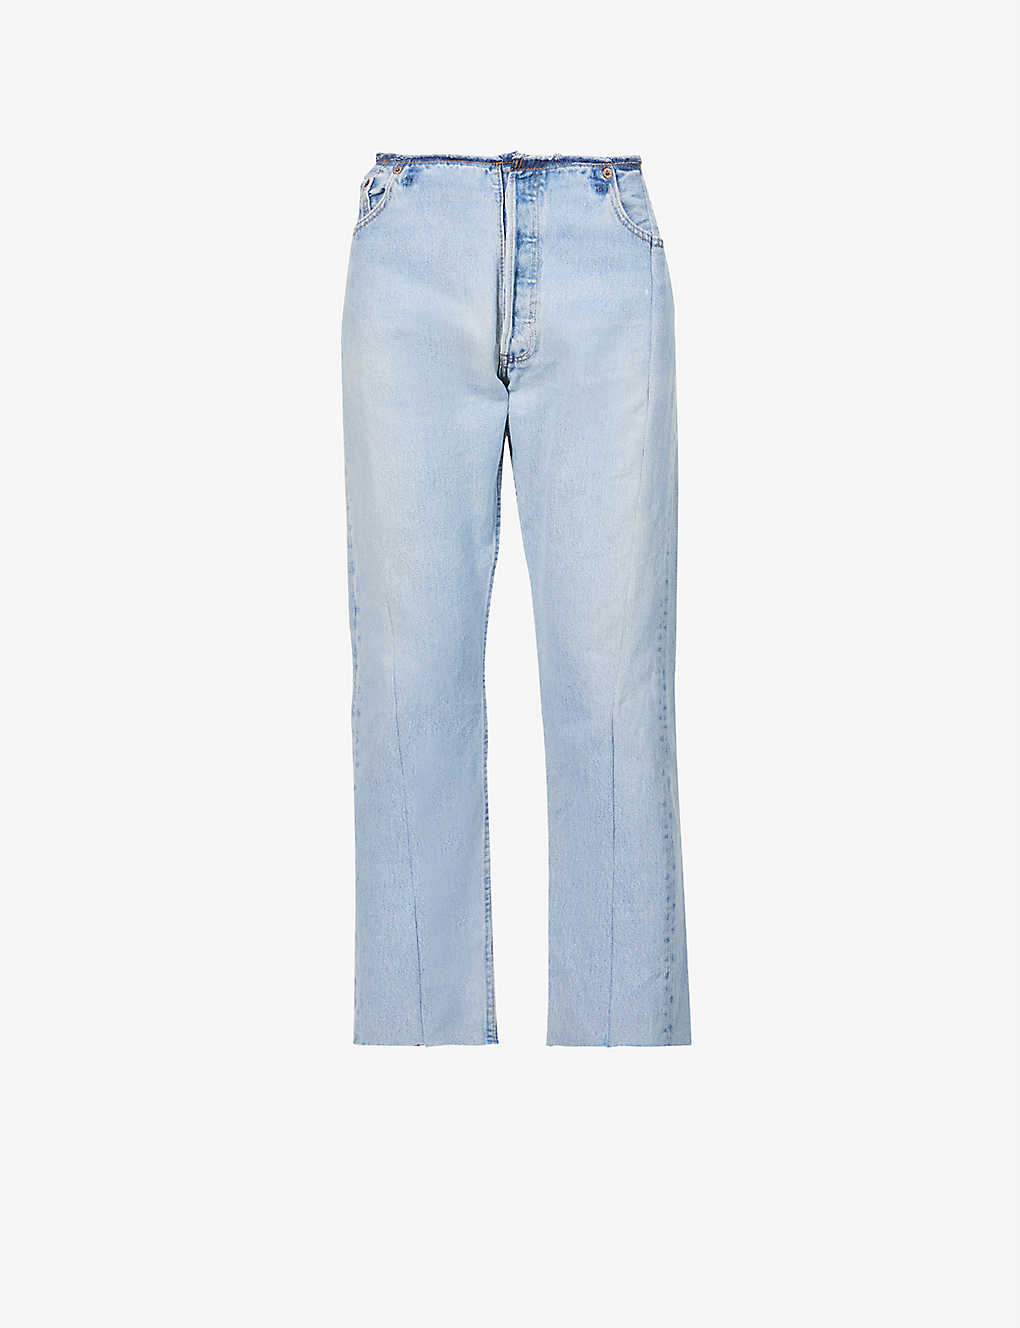 Selfridges & Co Men Clothing Jeans High Waisted Jeans Dad straight-leg high-rise jeans 